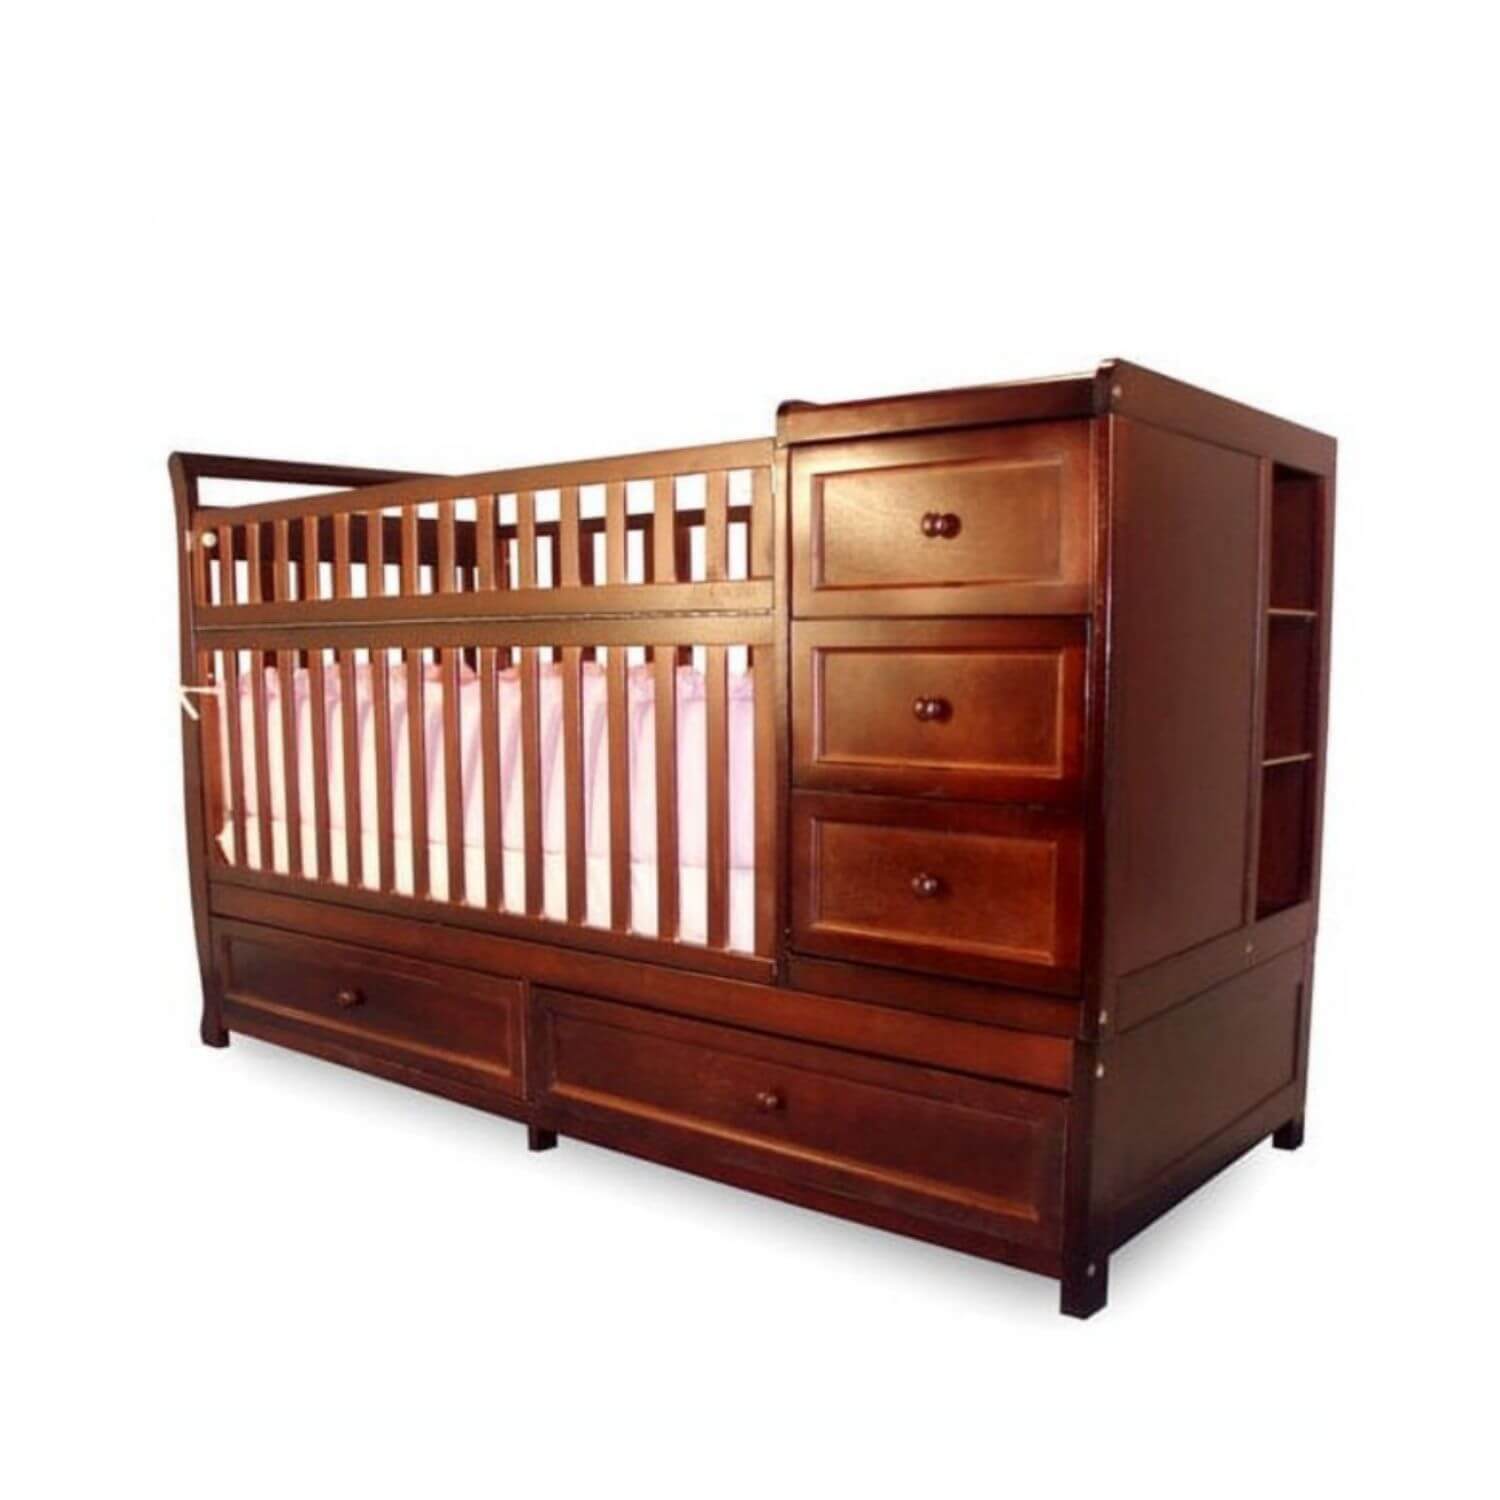 AFG Daphne 3-in-1 Crib and Changer Combo Cherry